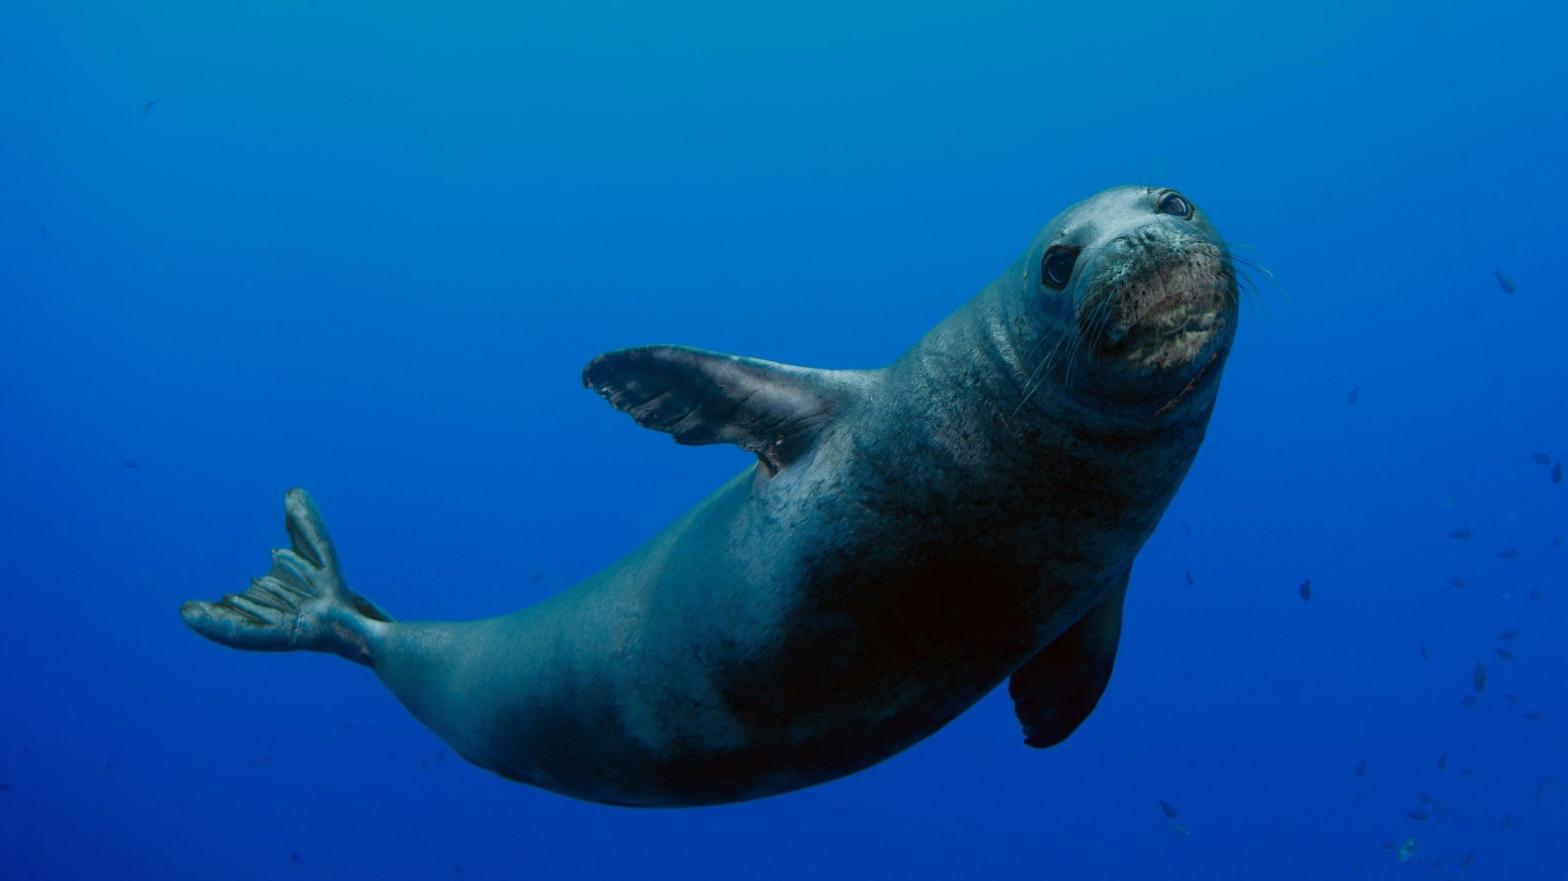 Please leave this monk seal alone. (Photo: Andre Seale, AP)